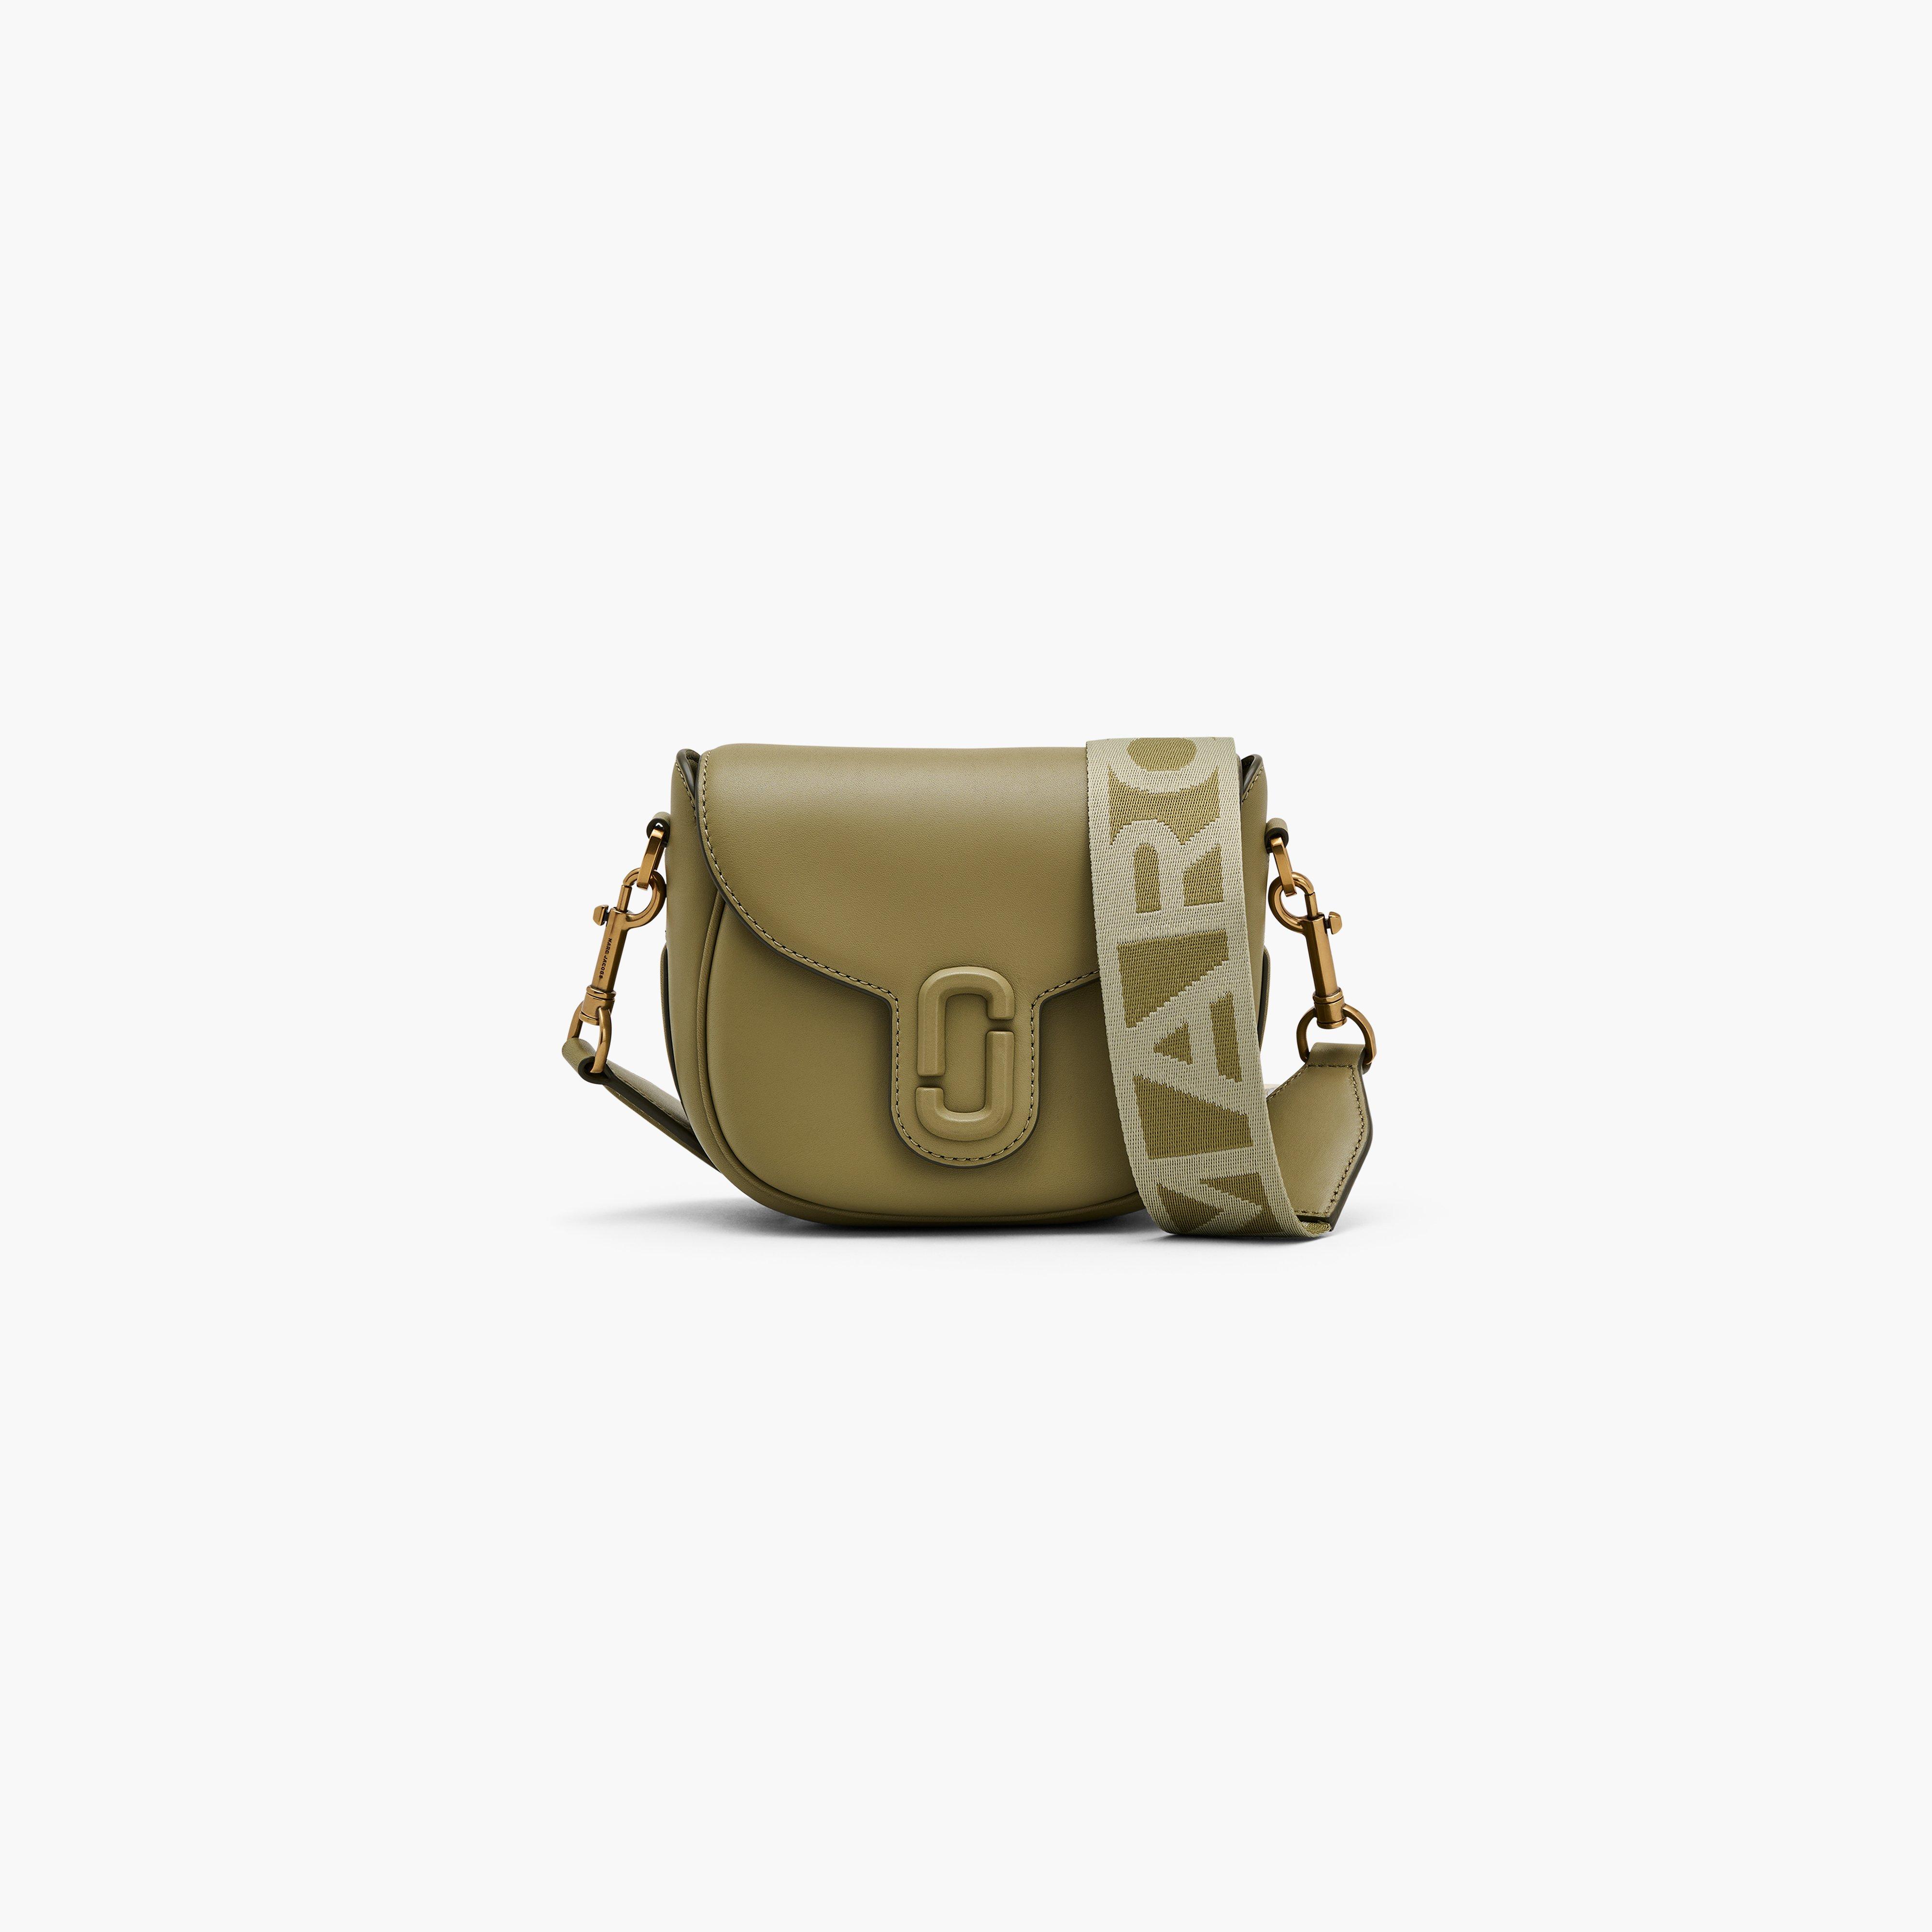 Marc by Marc jacobs The J Marc Small Saddle Bag,LIGHT MOSS